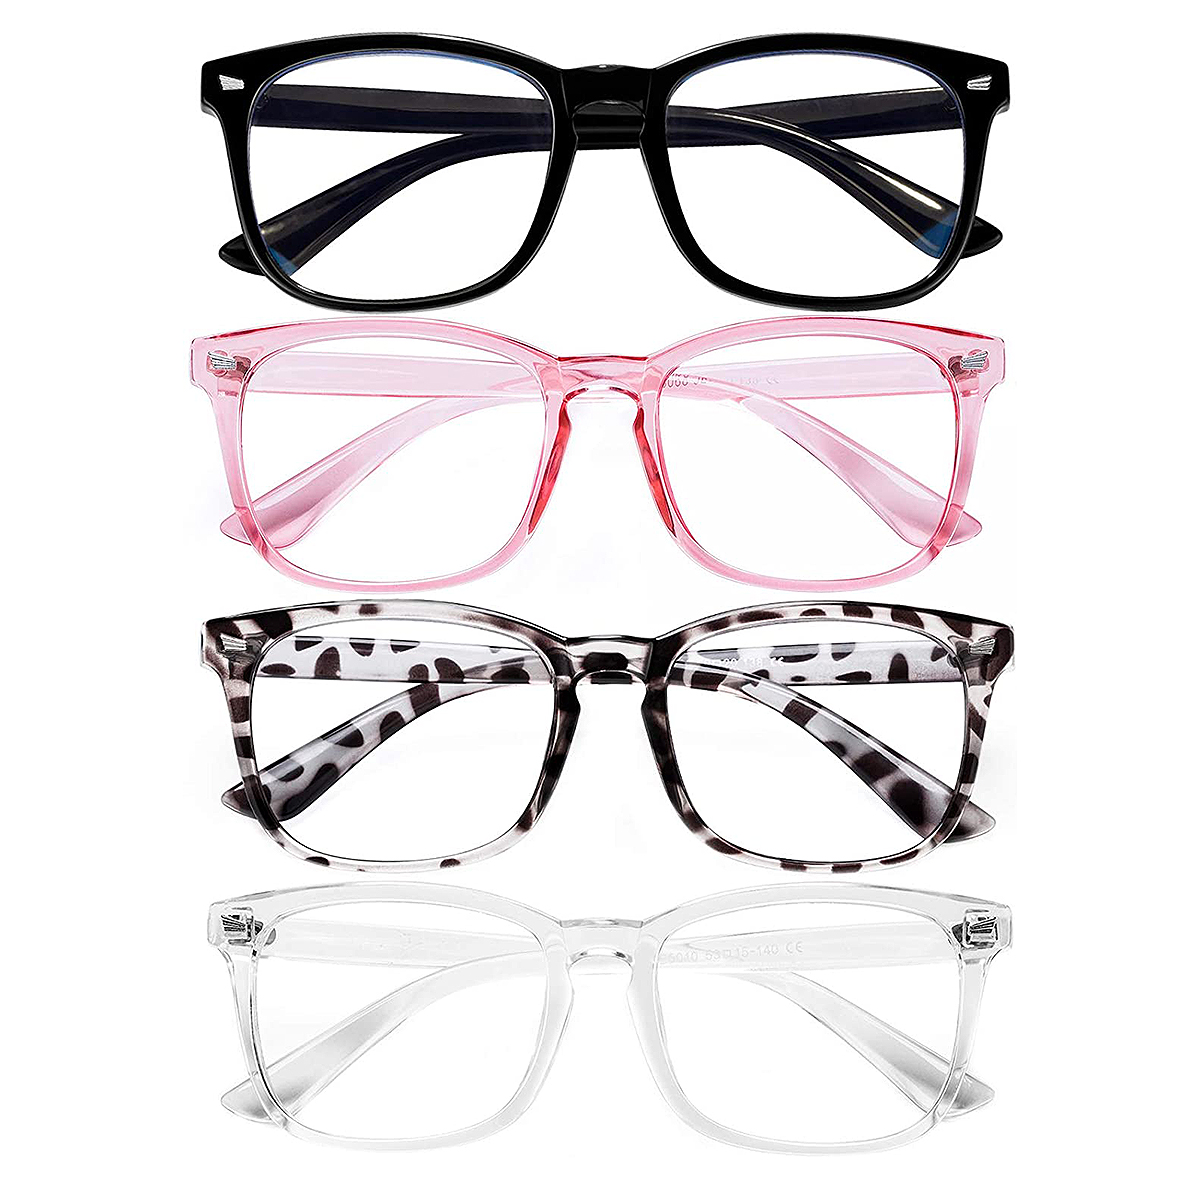 FEIDU Blue Light Glasses Come in a Super Stylish Pack of 4 | Us Weekly